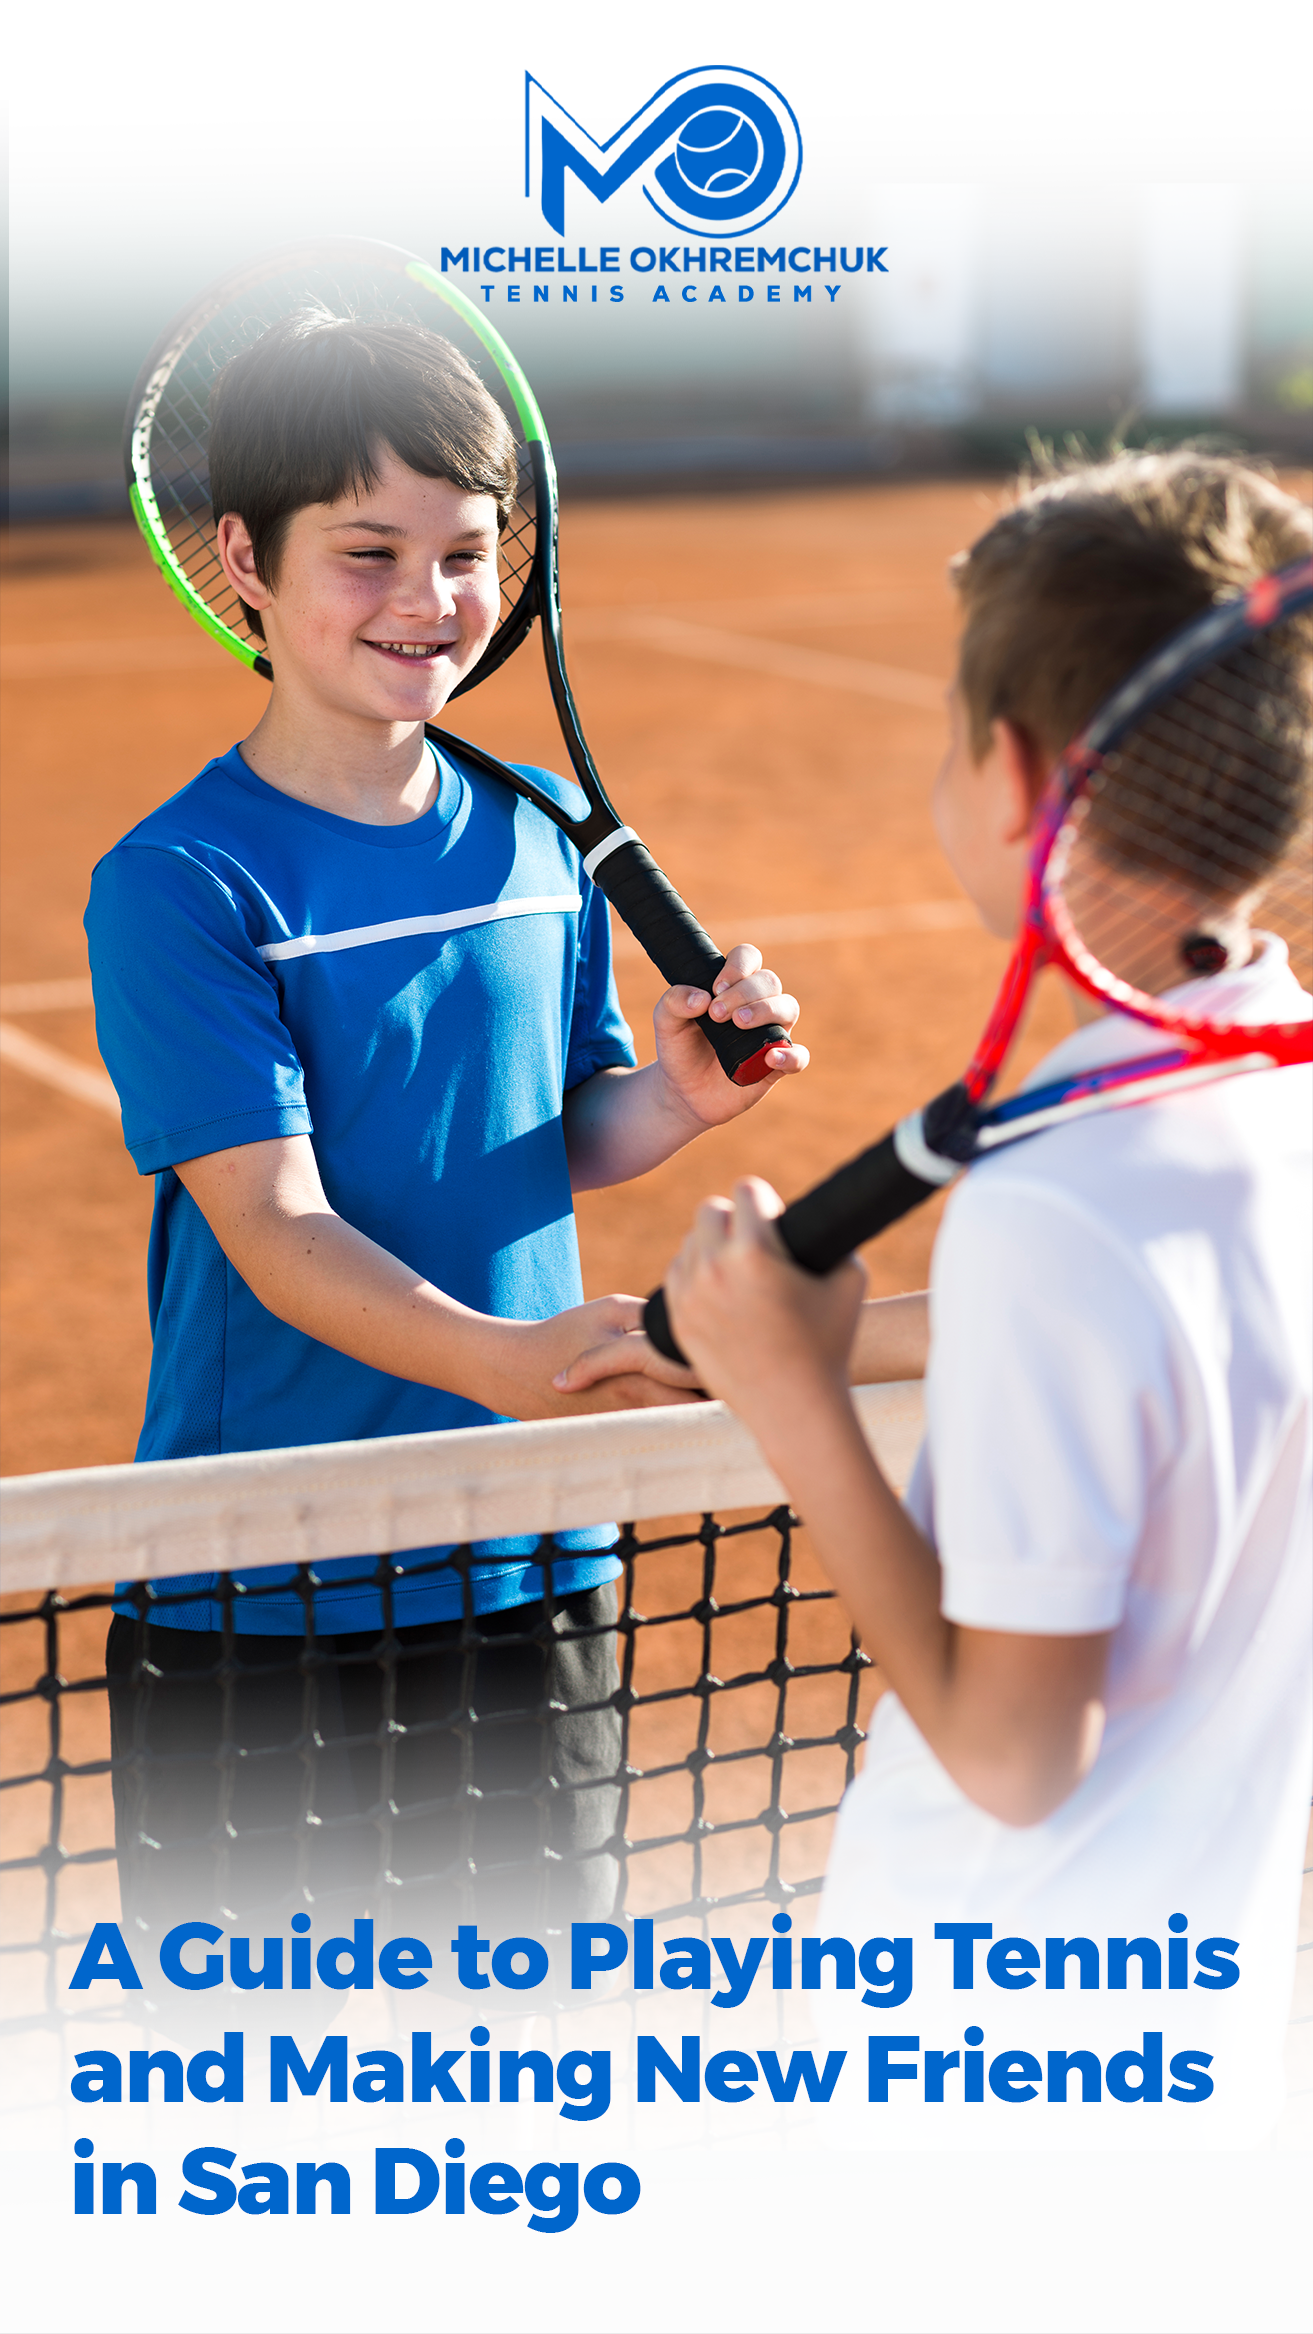 A Guide to Playing Tennis and Making New Friends in San Diego - Mo Tennis Training Academy